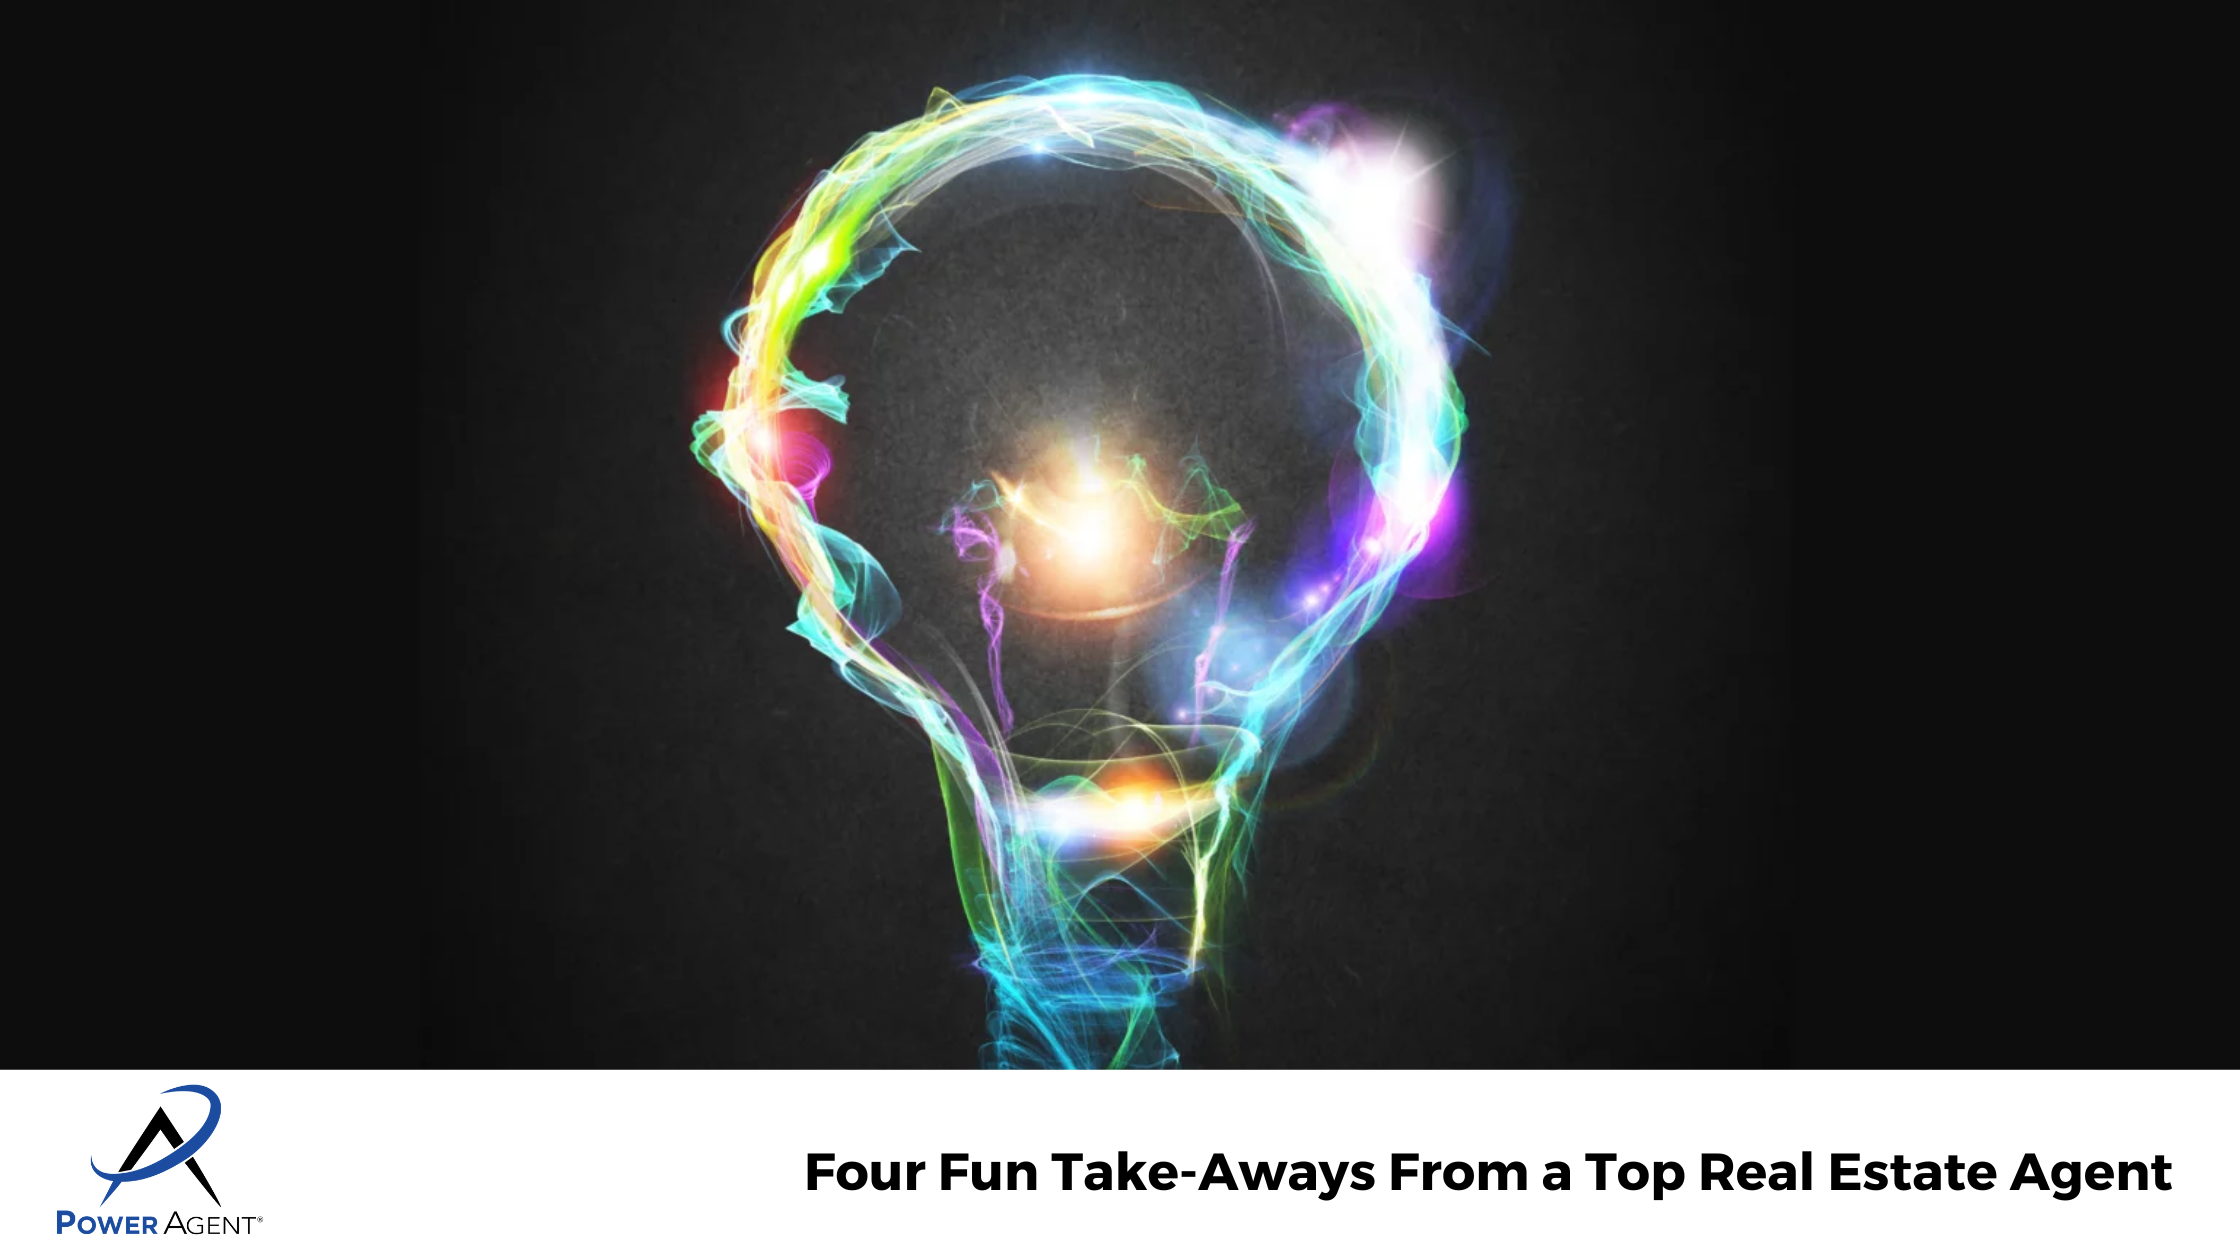 Four Fun Take-Aways From a Top Real Estate Agent